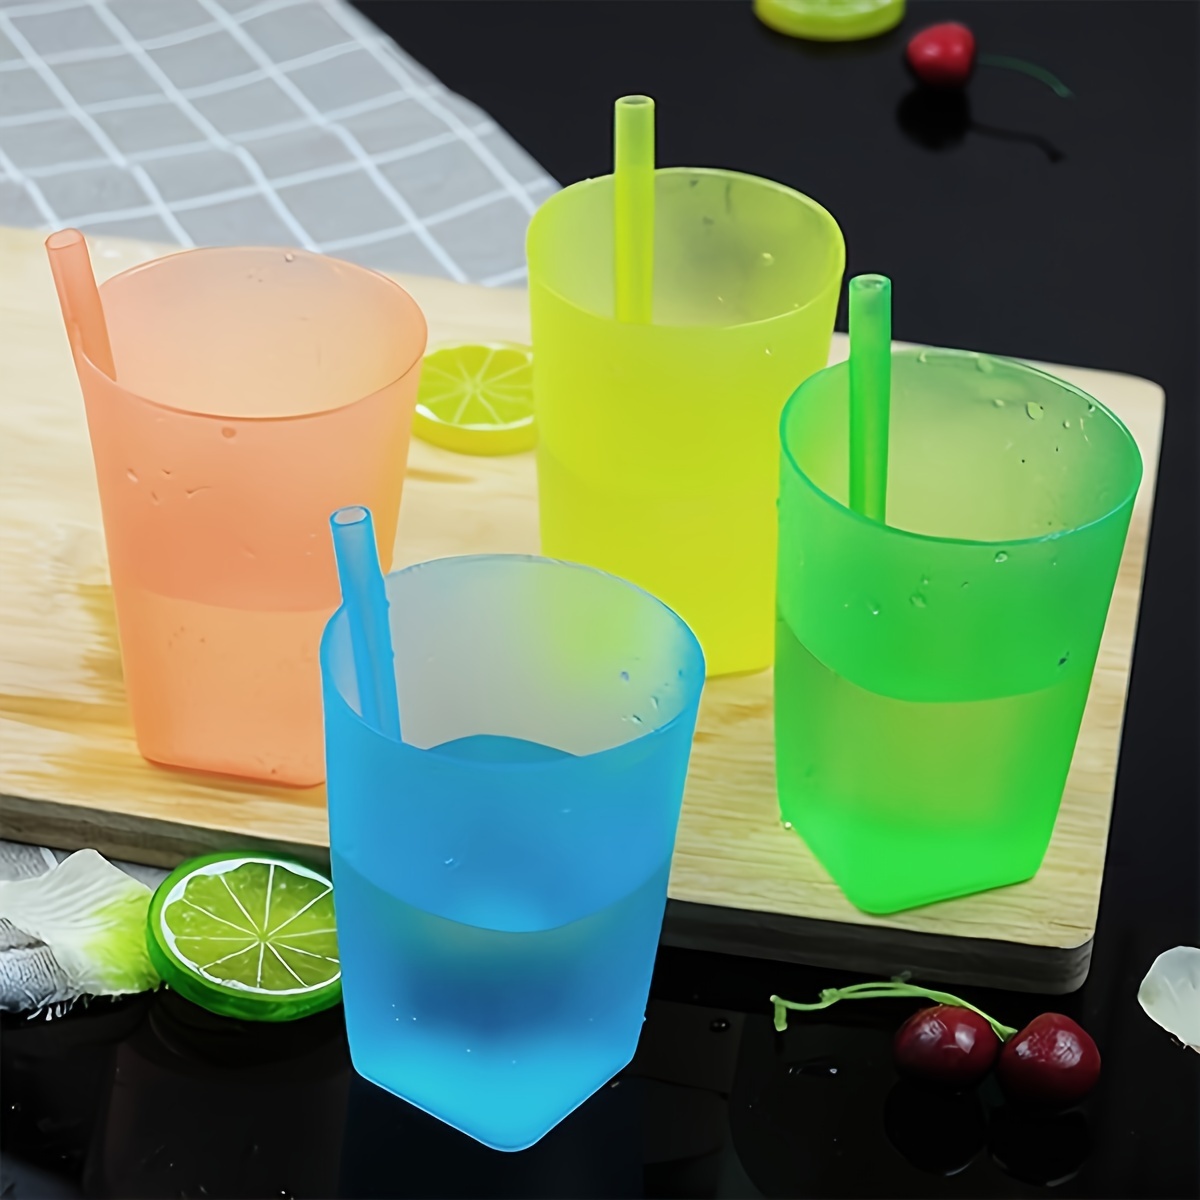 

2/4-piece Durable One-piece Straw Cups - Bpa-free Plastic, Spill-proof For Juice & Water - Perfect For Office, Camping, Dining - Sky Blue/red/yellow